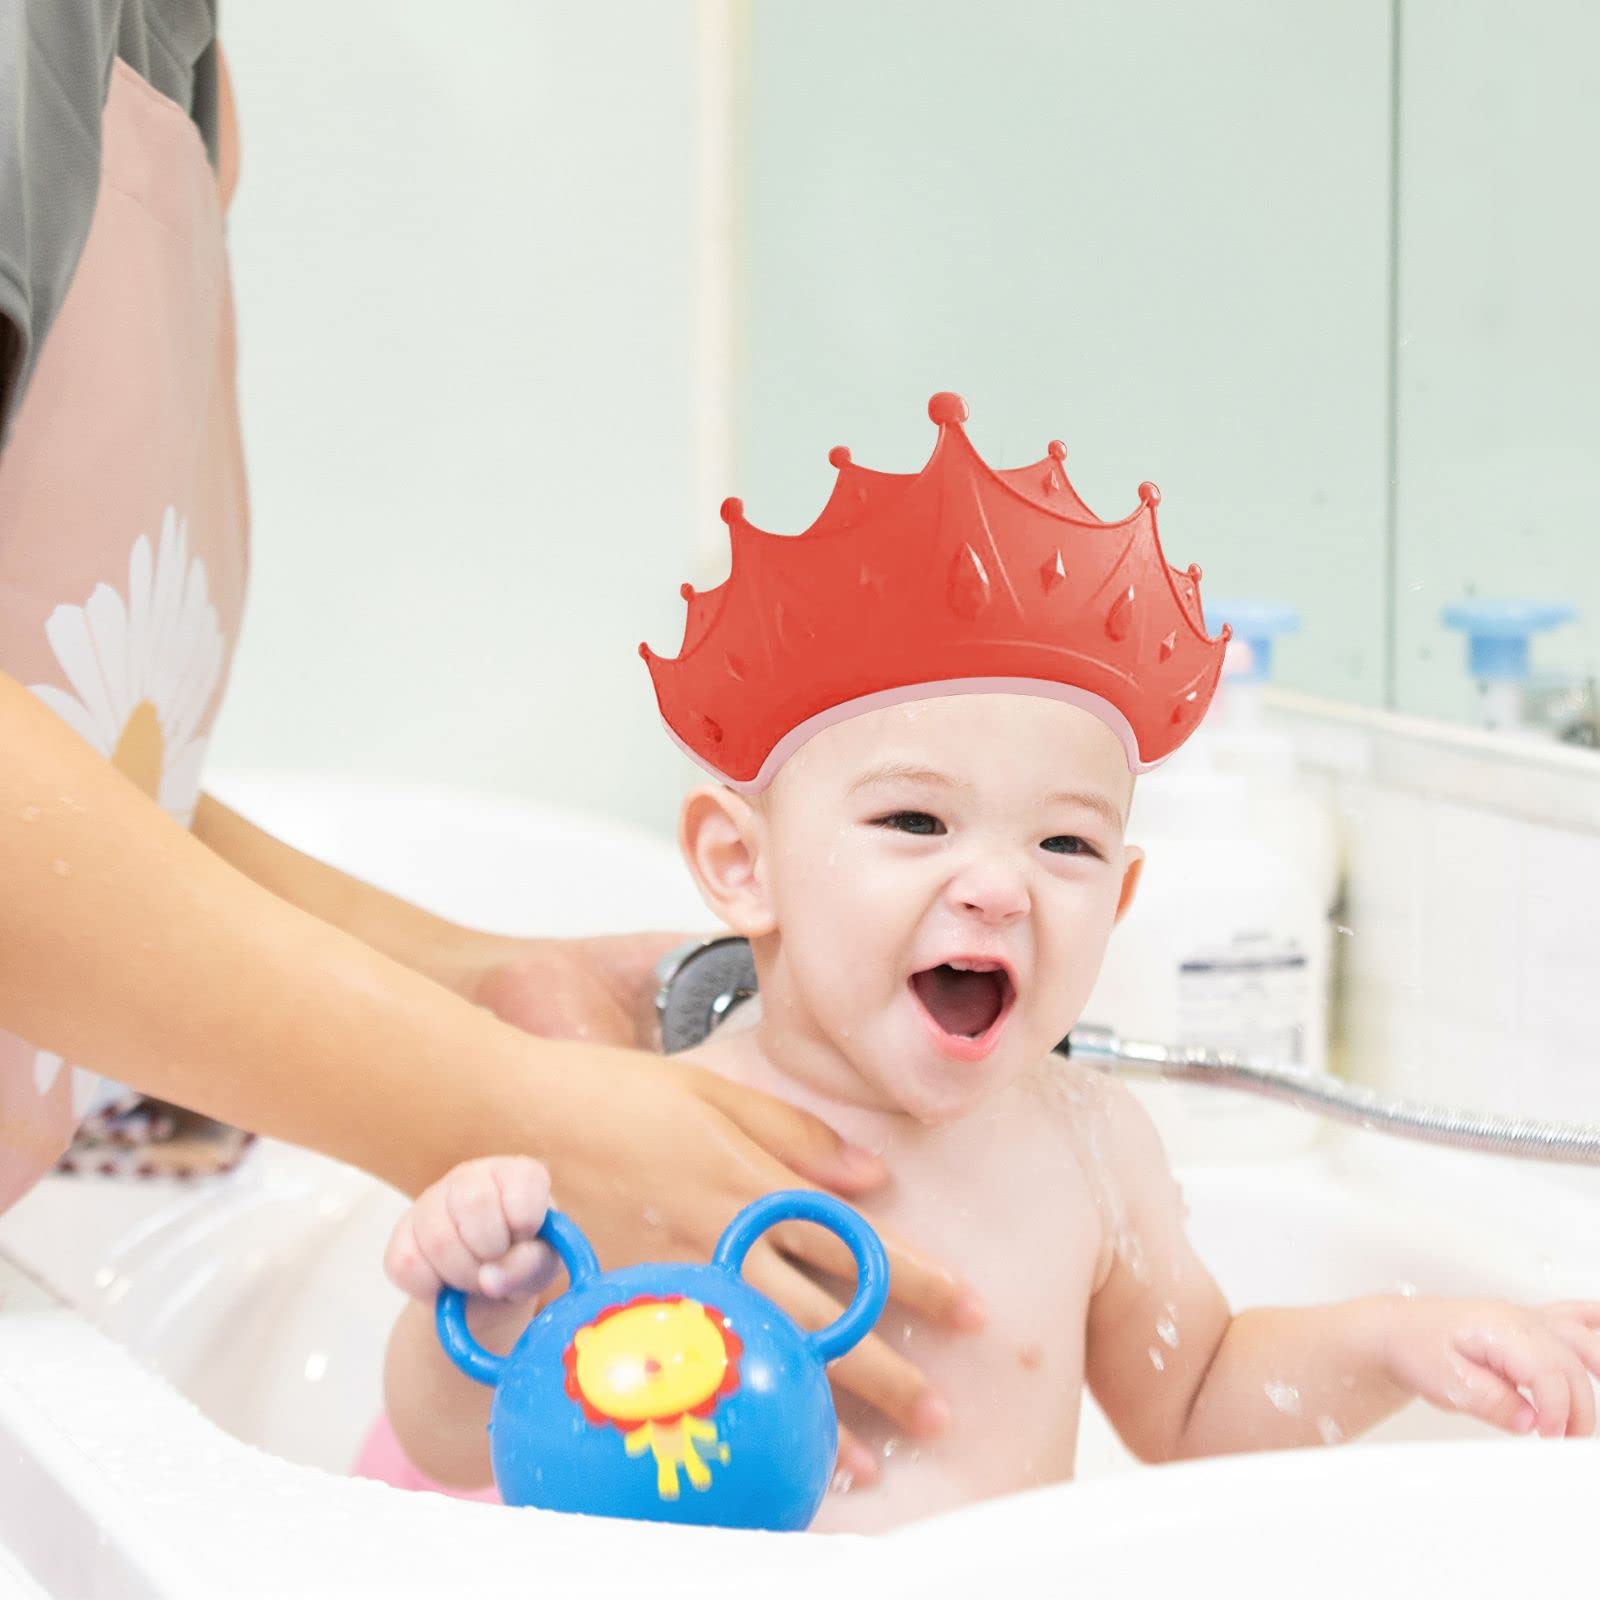 2 PCS Baby Shower Cap Silicone for Children， Soft Adjustable Bathing Crown Hat Safe for Washing Hair， Protect Eyes and Ears from Shampoo for Baby ，Toddlers and Kids from 6 Months to 12-Year Old (red)